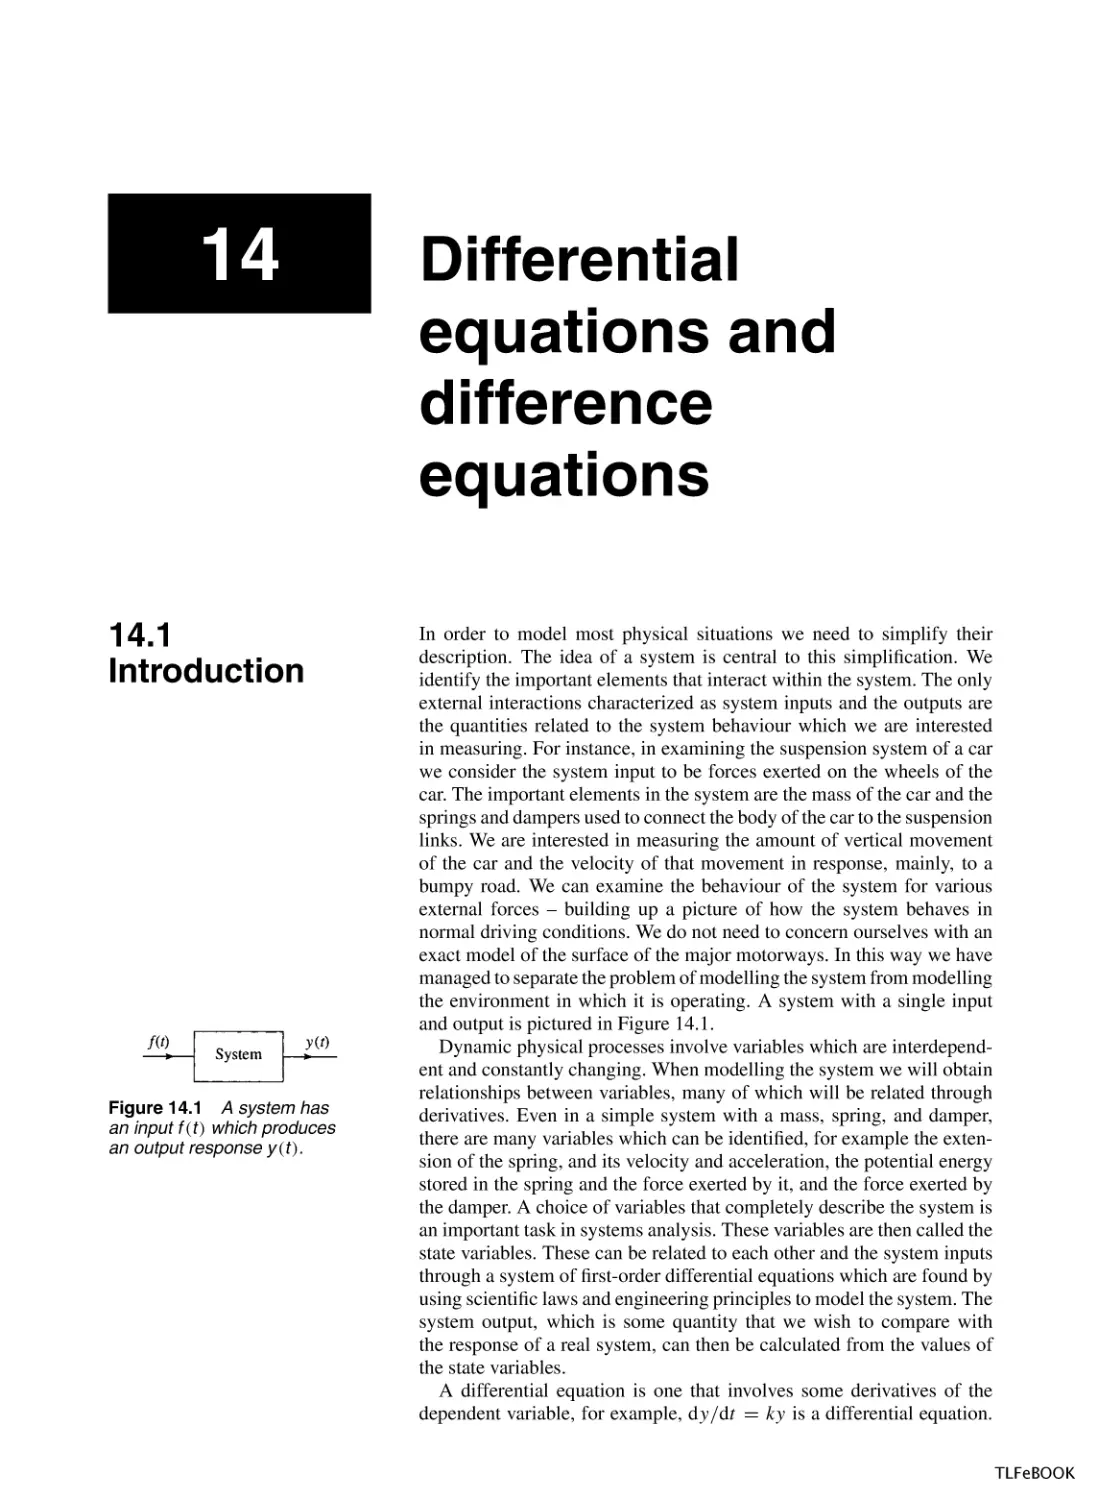 Differential Equations and Difference Equations